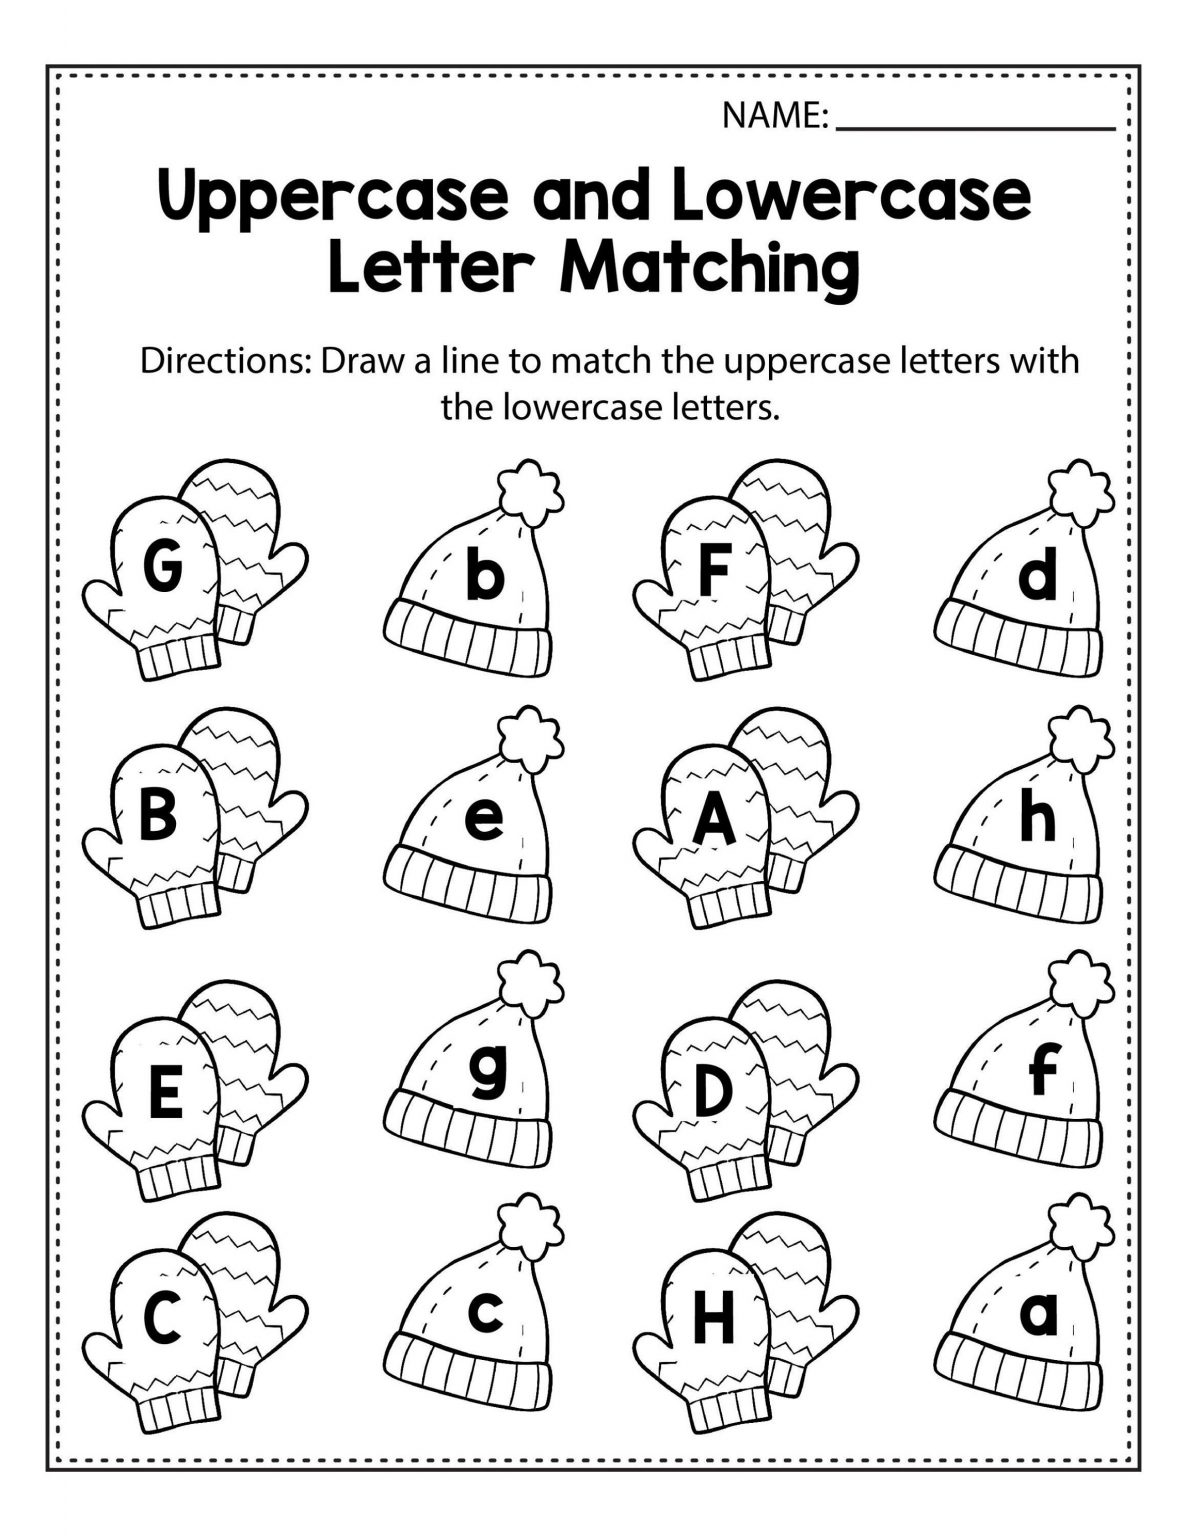 practice-writing-lowercase-letter-worksheets-101-activity